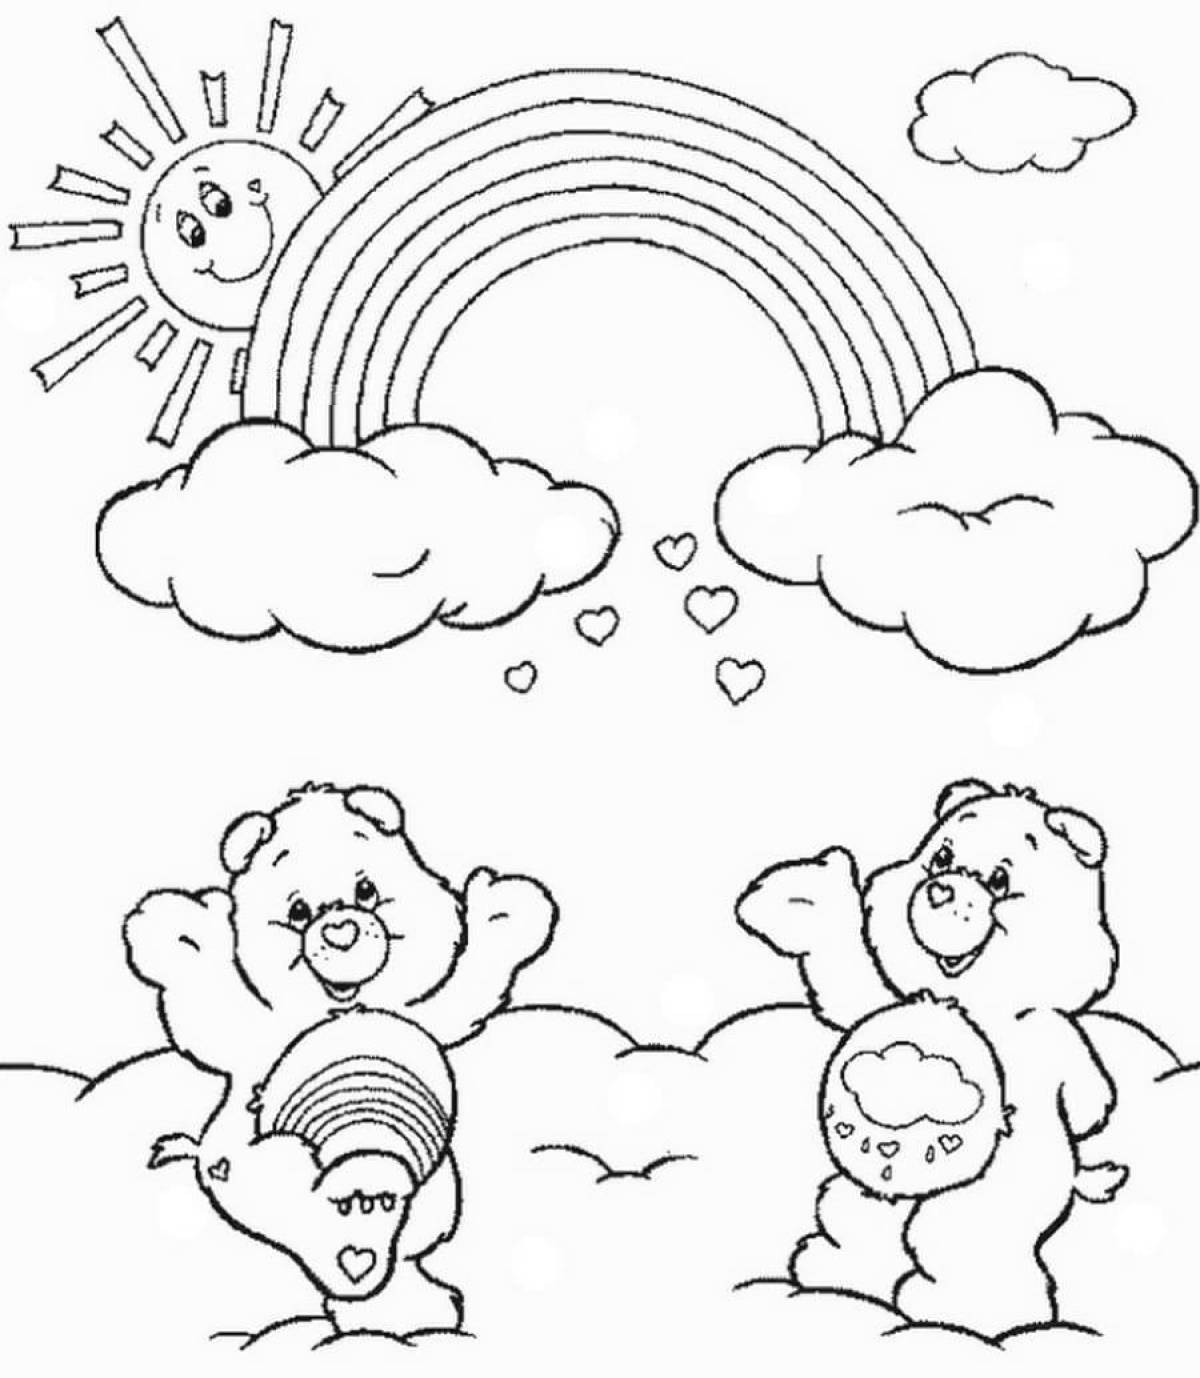 Adorable rainbow coloring book for kids 5-6 years old